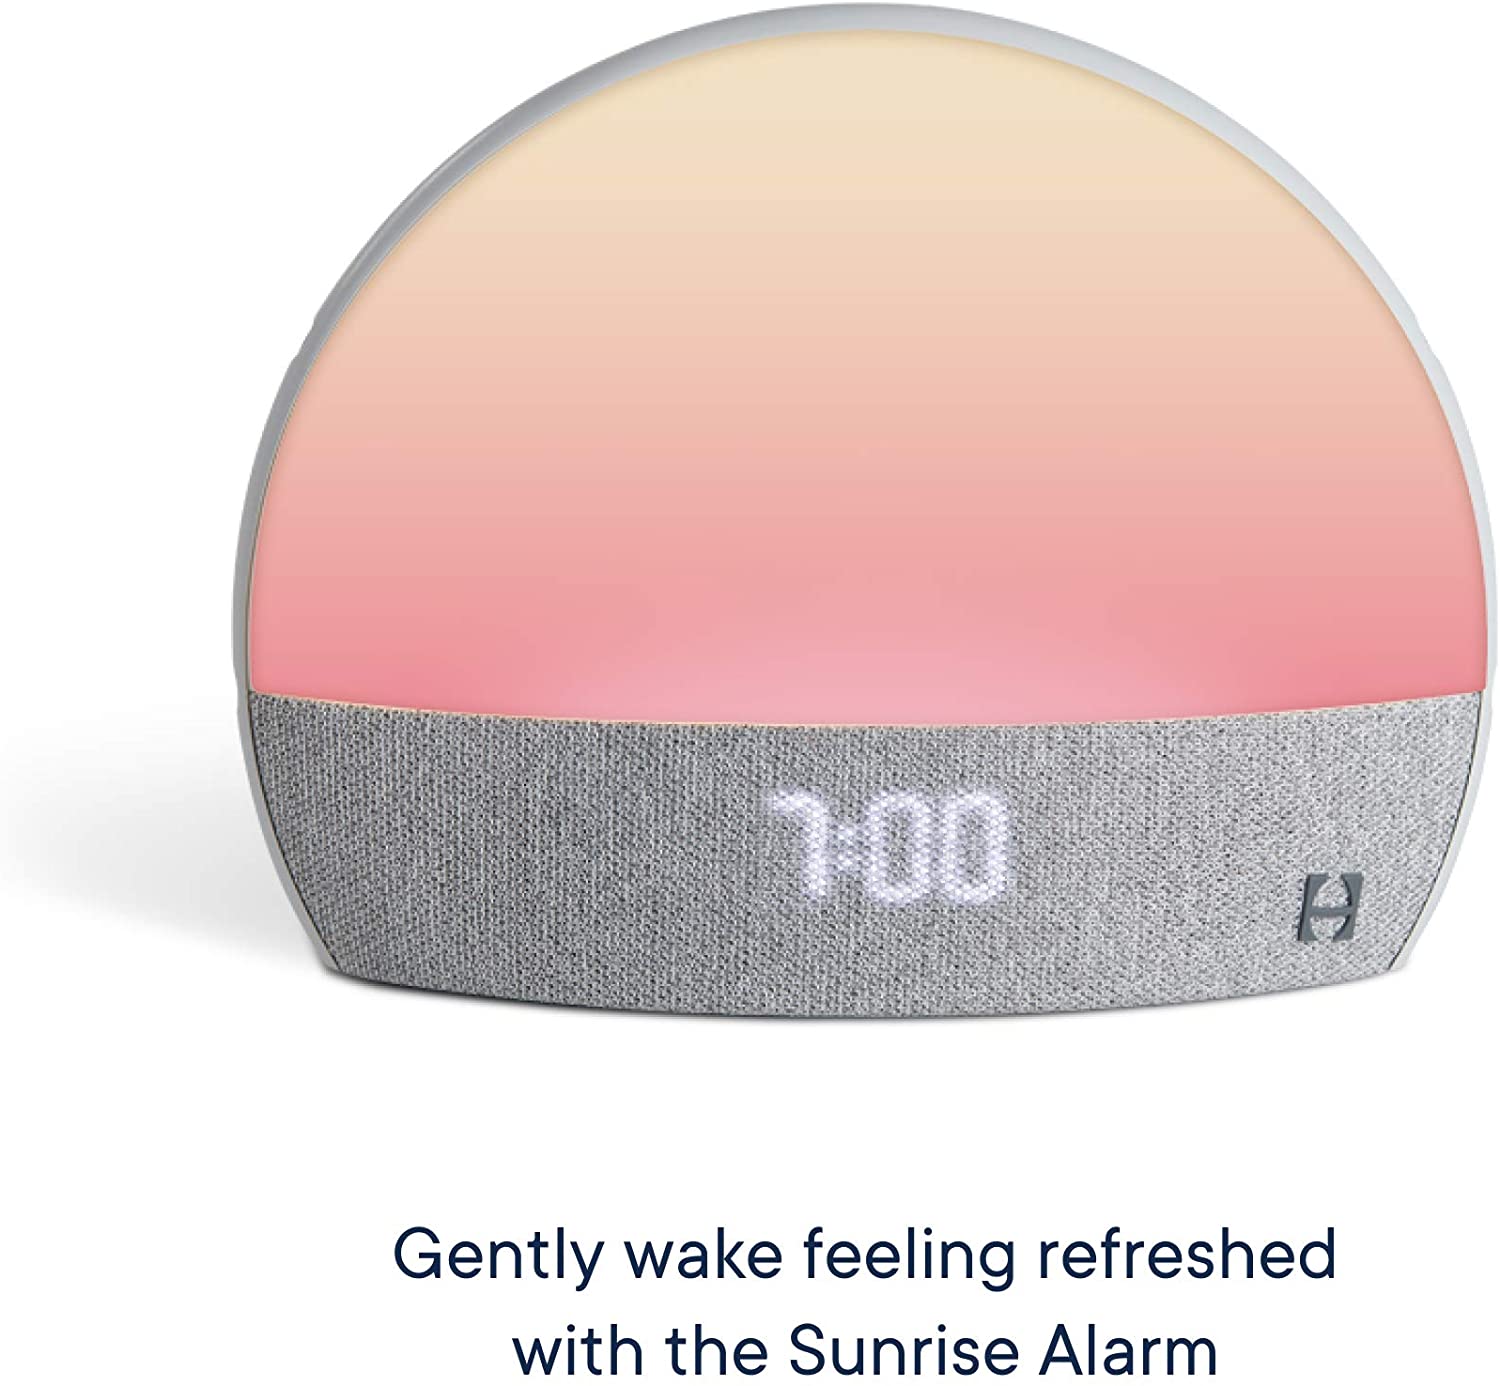 Hatch Restore - Sound Machine, Smart Light, Personal Sleep Routine, Bedside Reading Light, Wind Down Content and Sunrise Alarm Clock for Gentle Wake Up - image 5 of 6